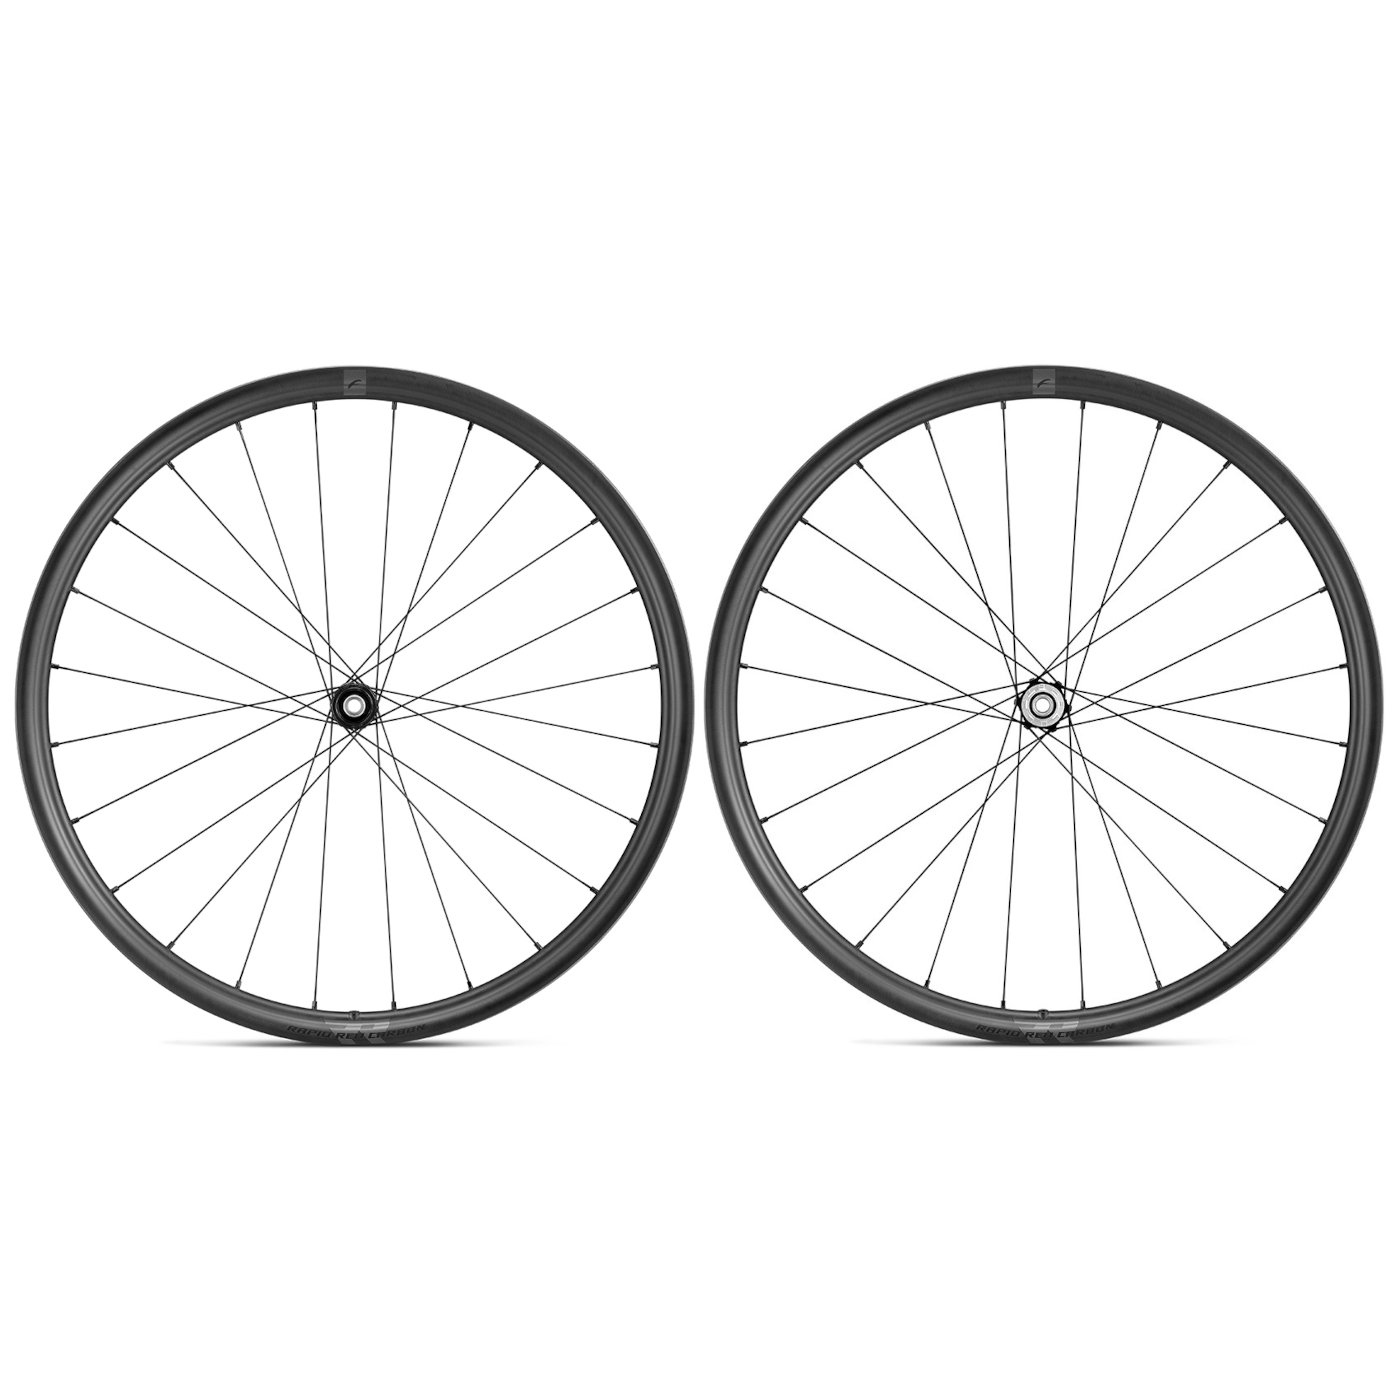 Picture of Fulcrum Rapid Red Carbon DB Wheelset - Clincher - Centerlock - FW: 12x100mm | RW: 12x142mm